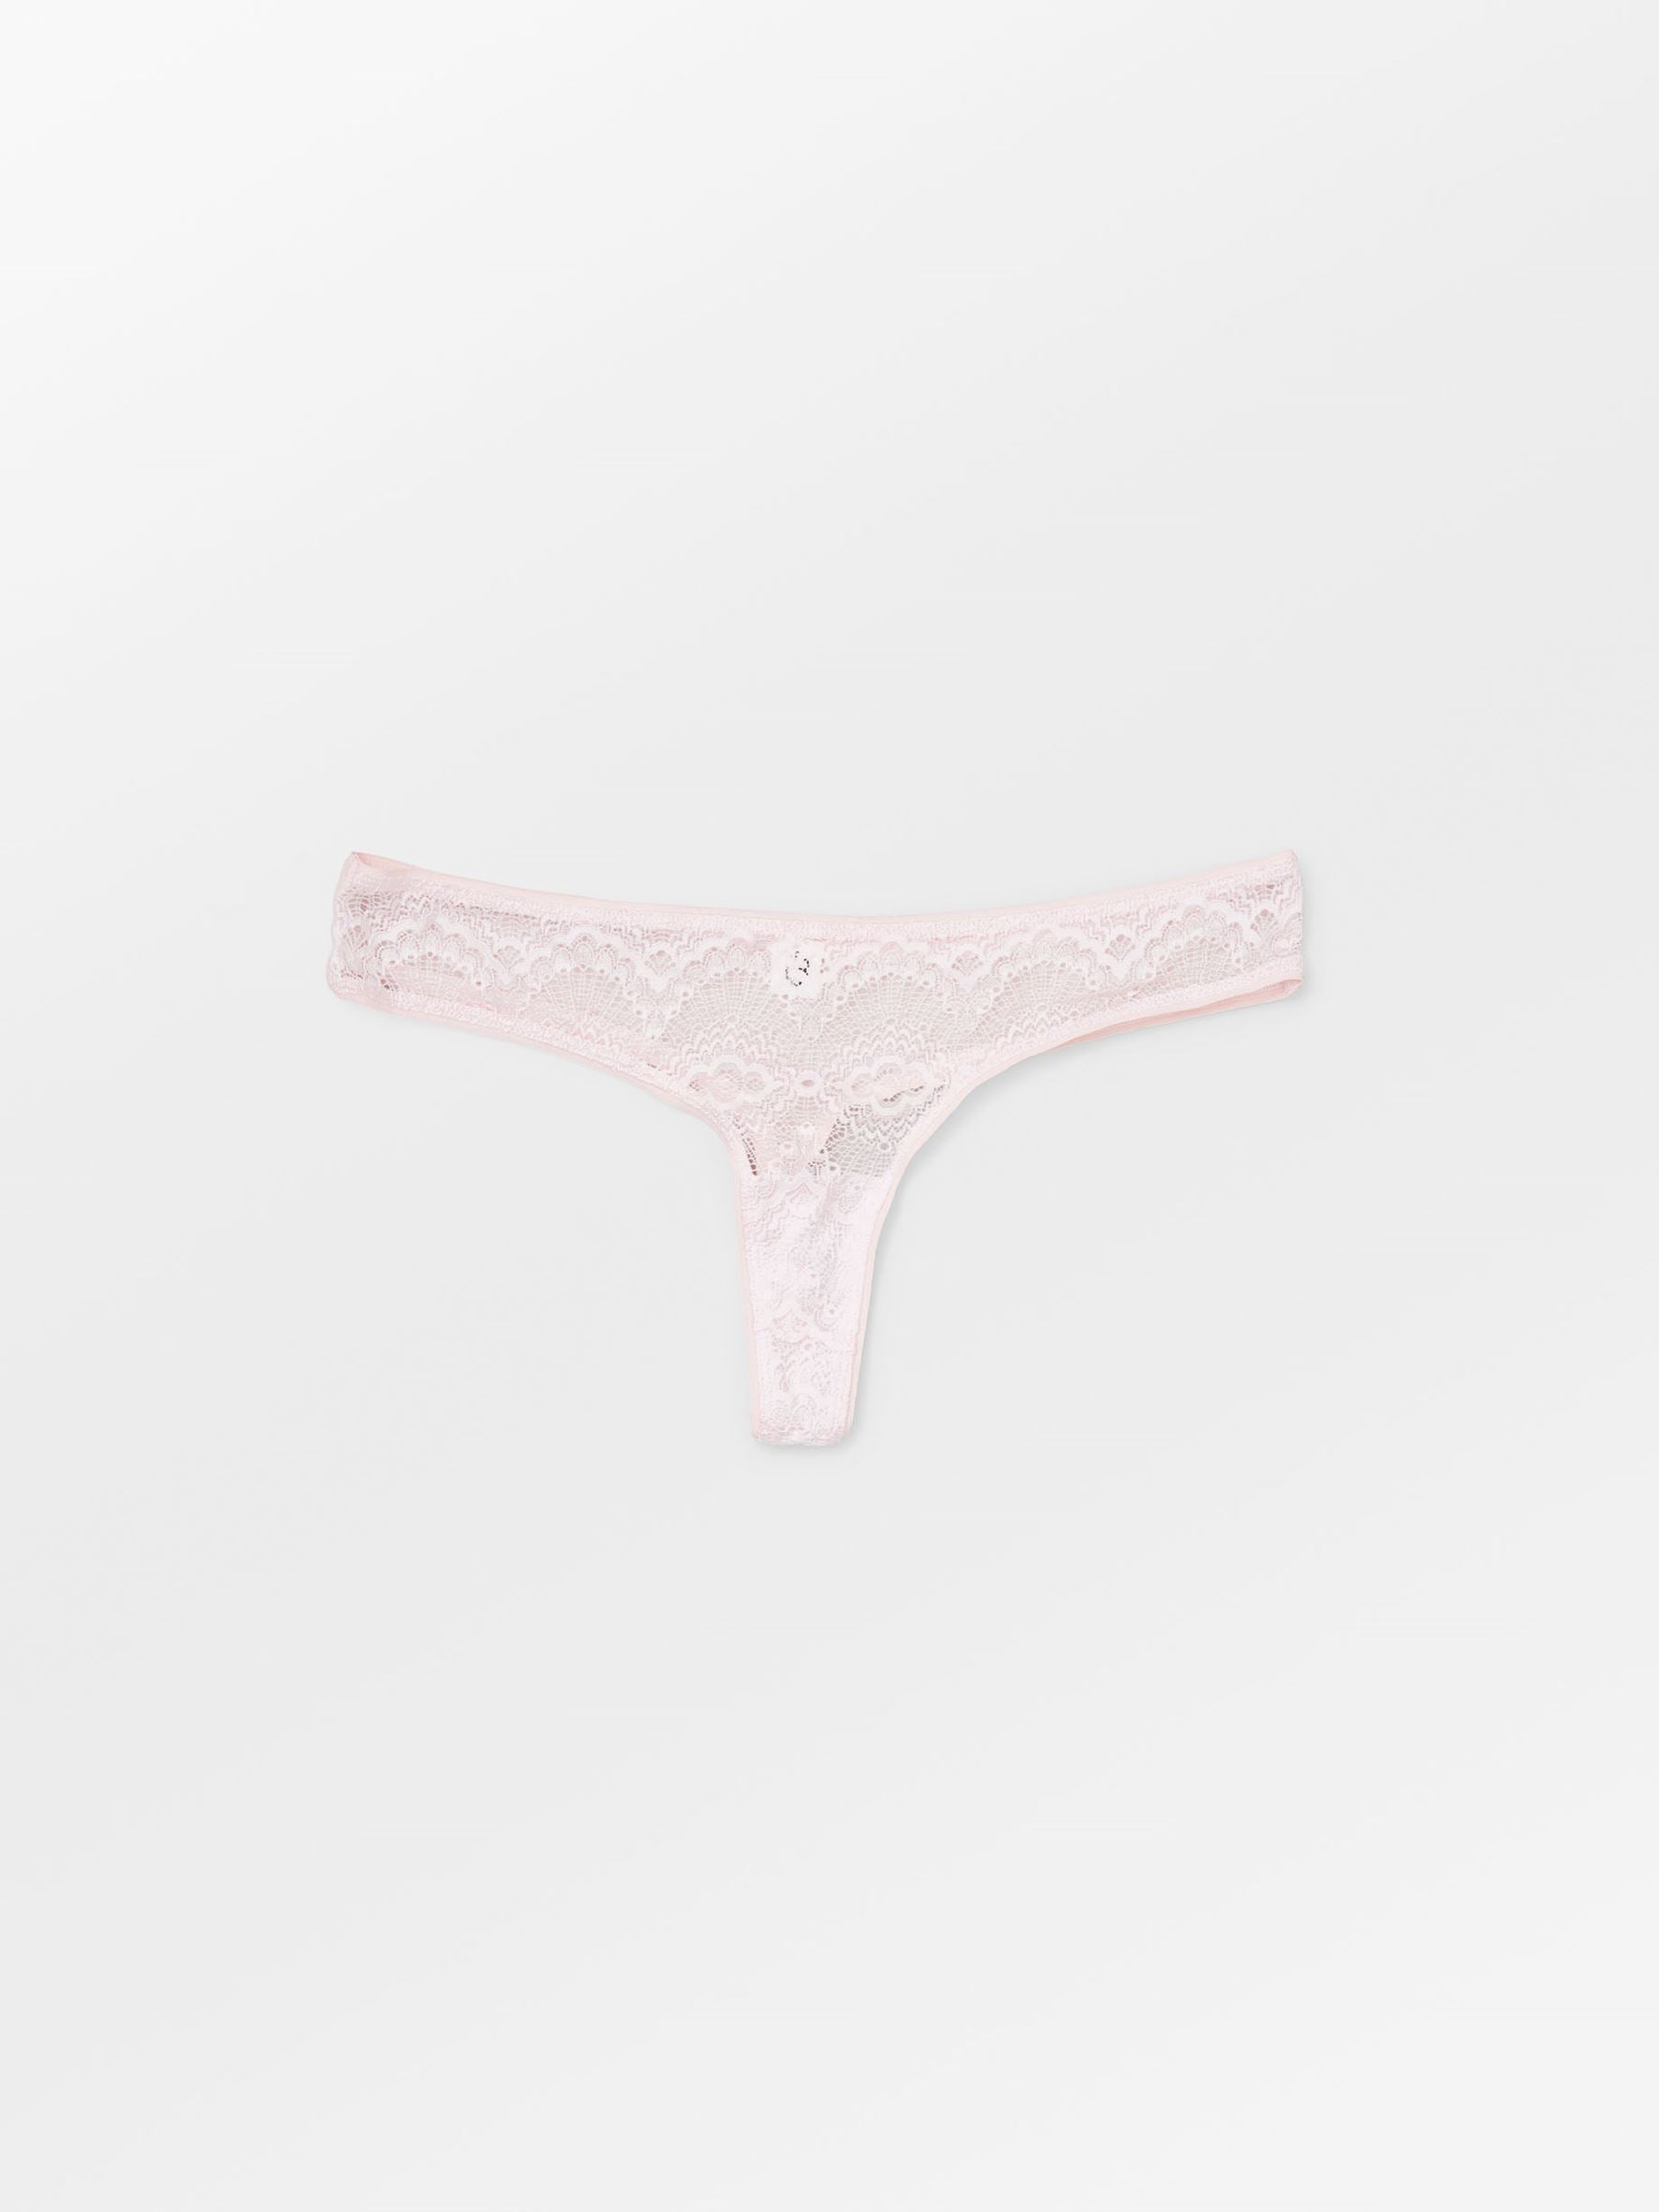 Becksöndergaard, Wave Lace Rita String - Icy Pink, archive, archive, sale, sale